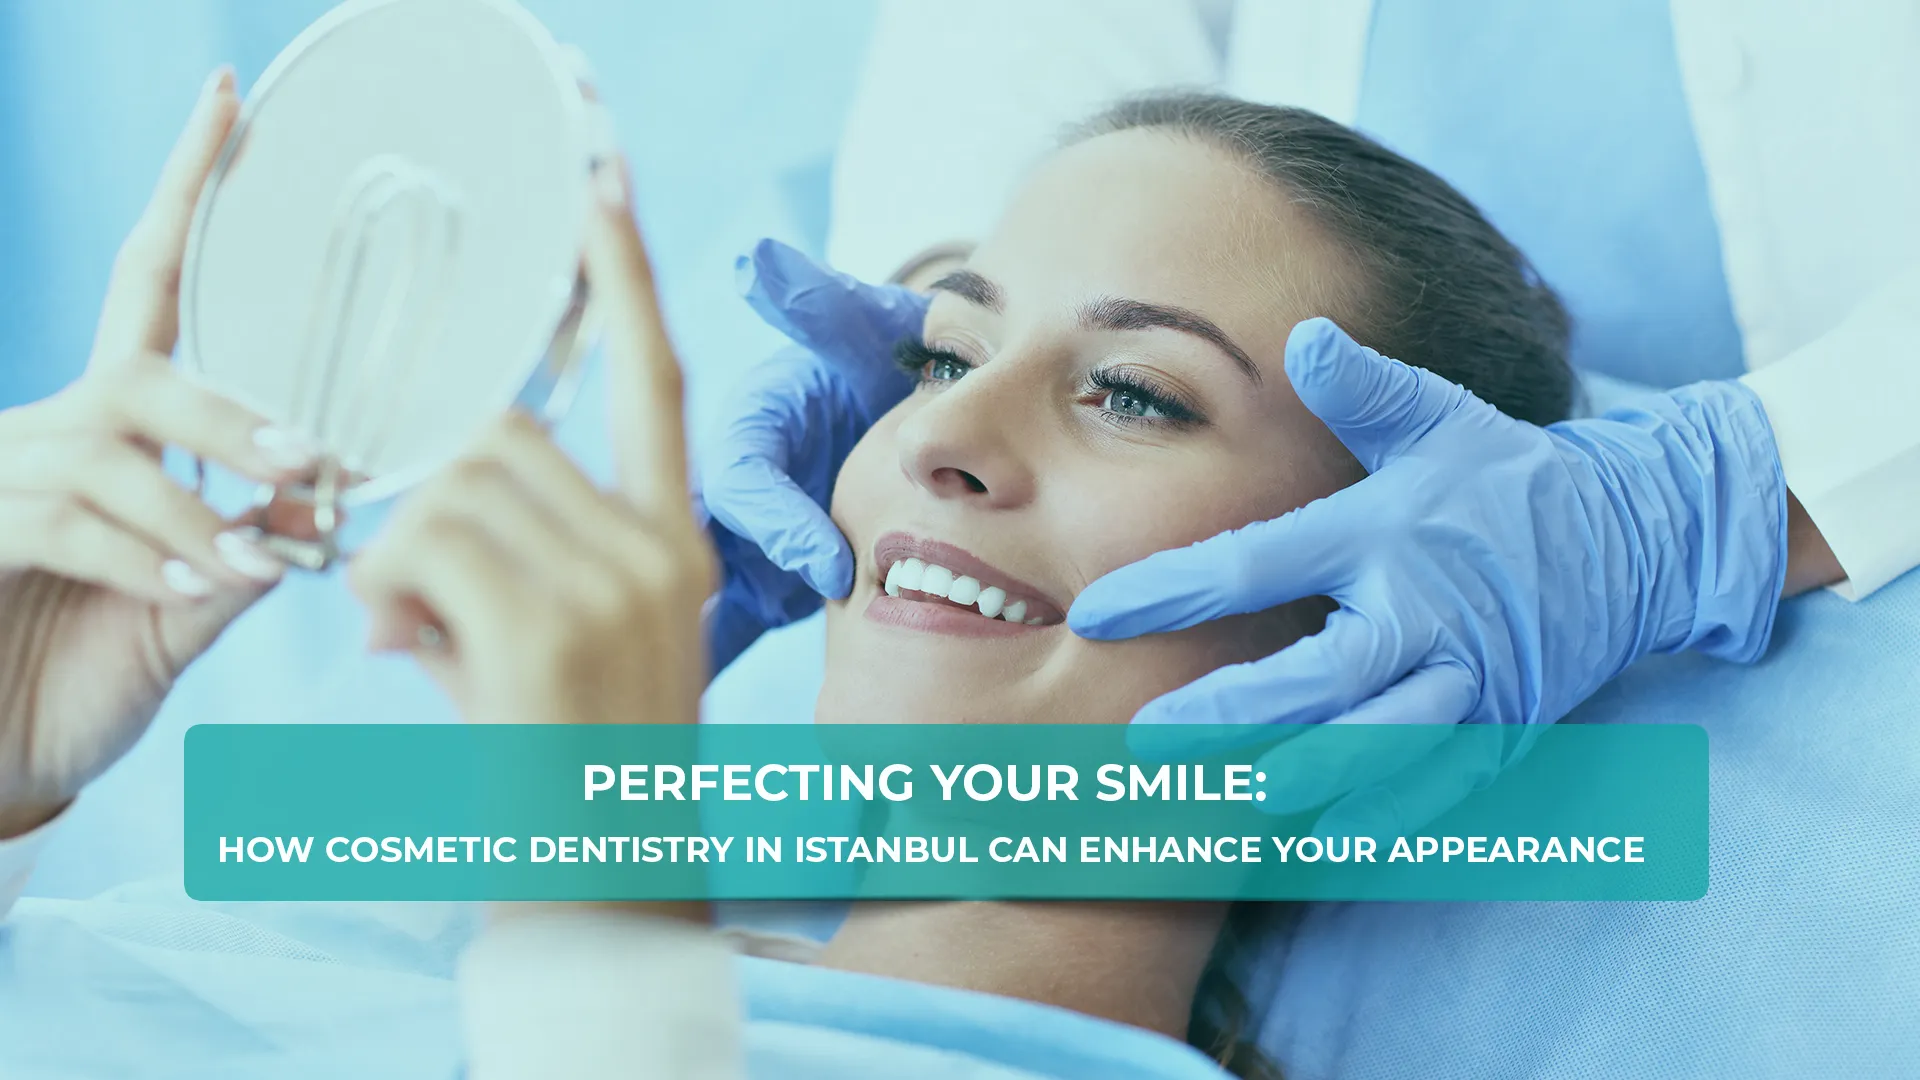 Cosmetic dentistry in Istanbul is a popular option for individuals seeking high-quality dental treatments at competitive prices.